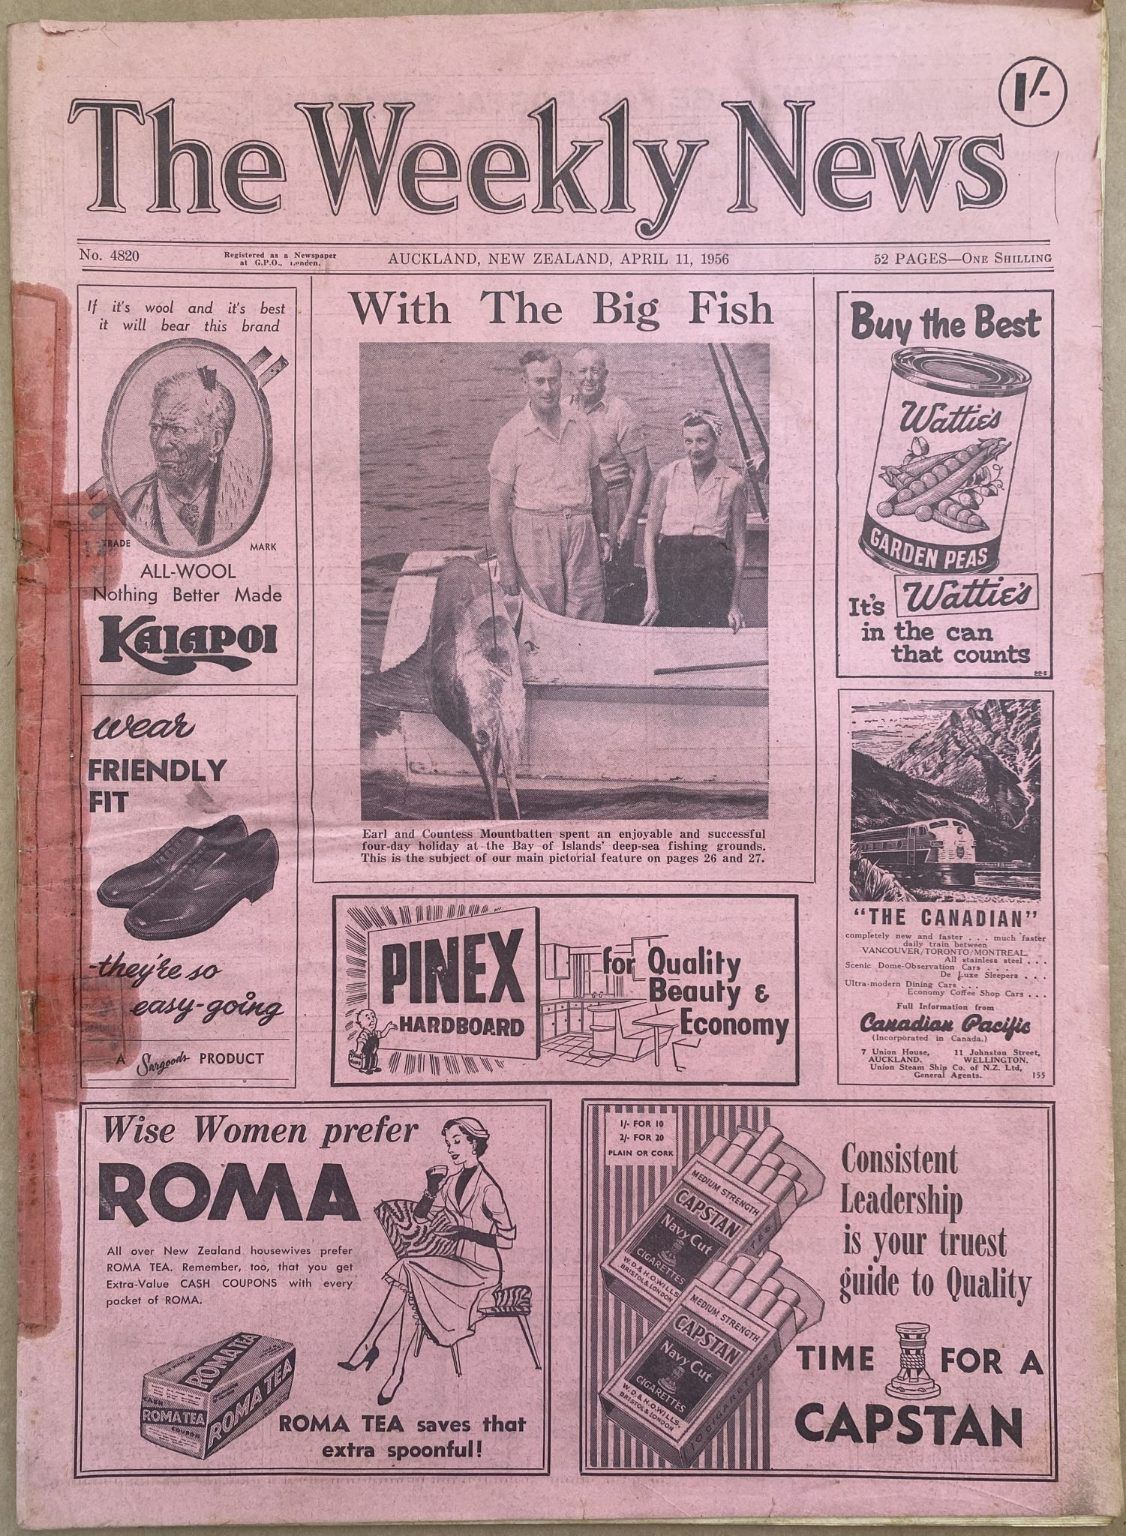 OLD NEWSPAPER: The Weekly News - No. 4820, 11 April 1956